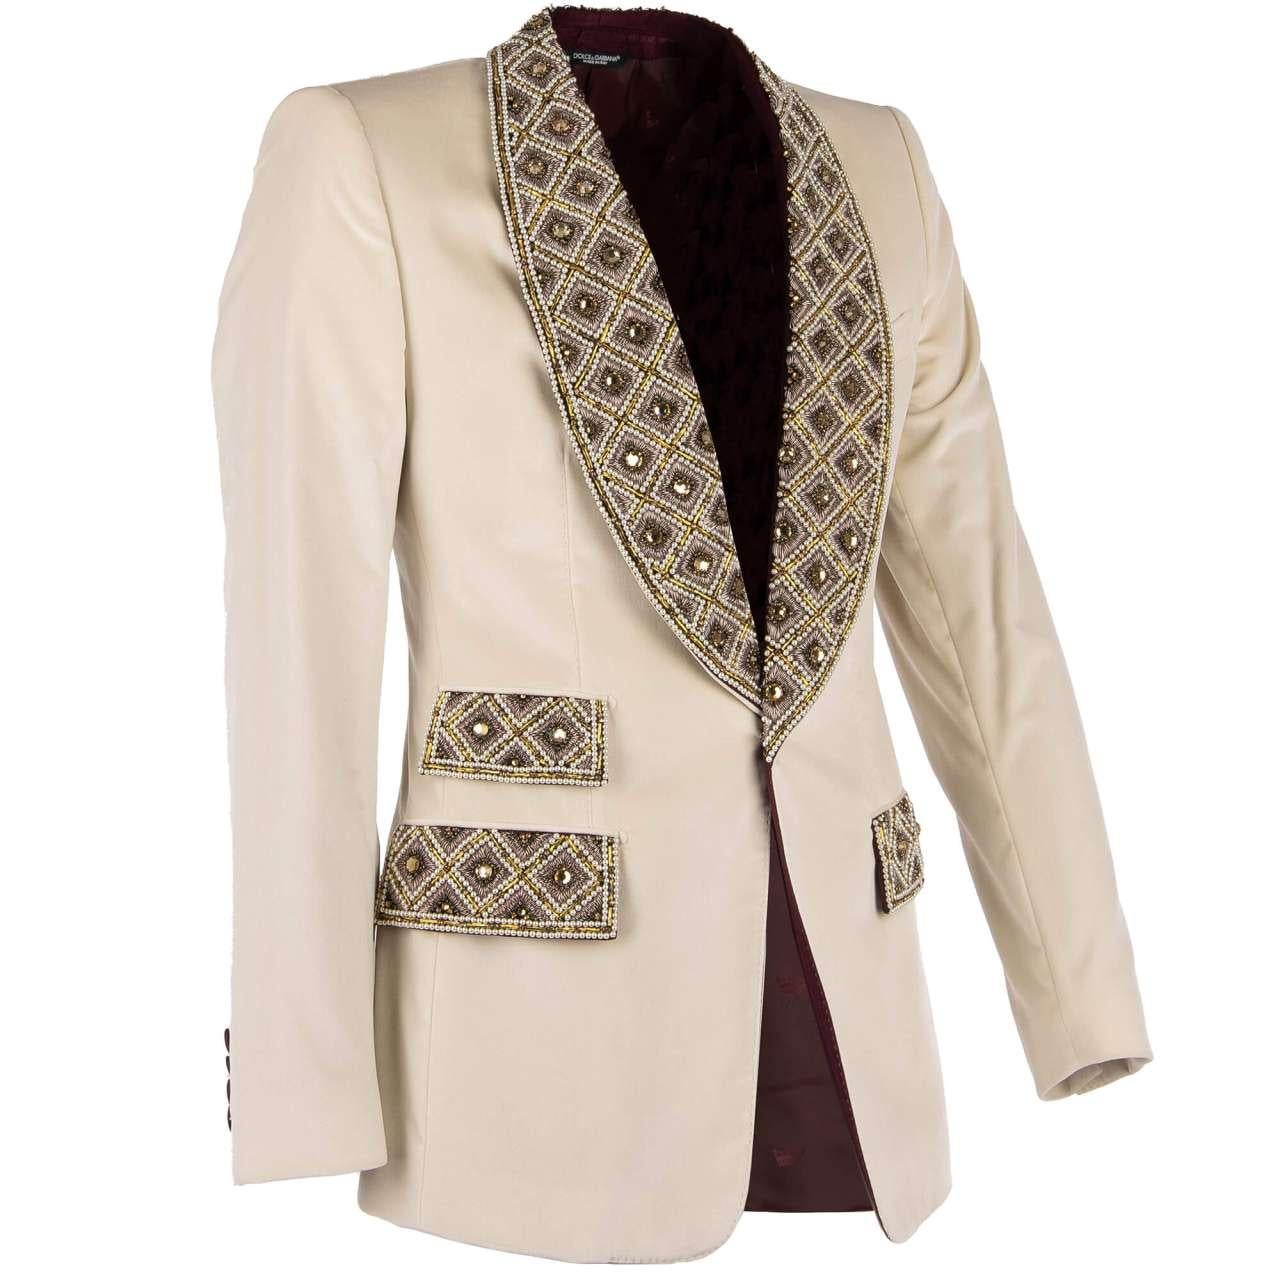 - Stunning Baroque Style velvet tuxedo / blazer with handmade crystals, pearls and gold embroidery at the lapel and pockets by DOLCE & GABBANA - Former RRP: EUR 3.950 - MADE IN ITALY - New with Tag - Slim Fit - Model: G2MF0Z FUVCF-M0299 - Material: